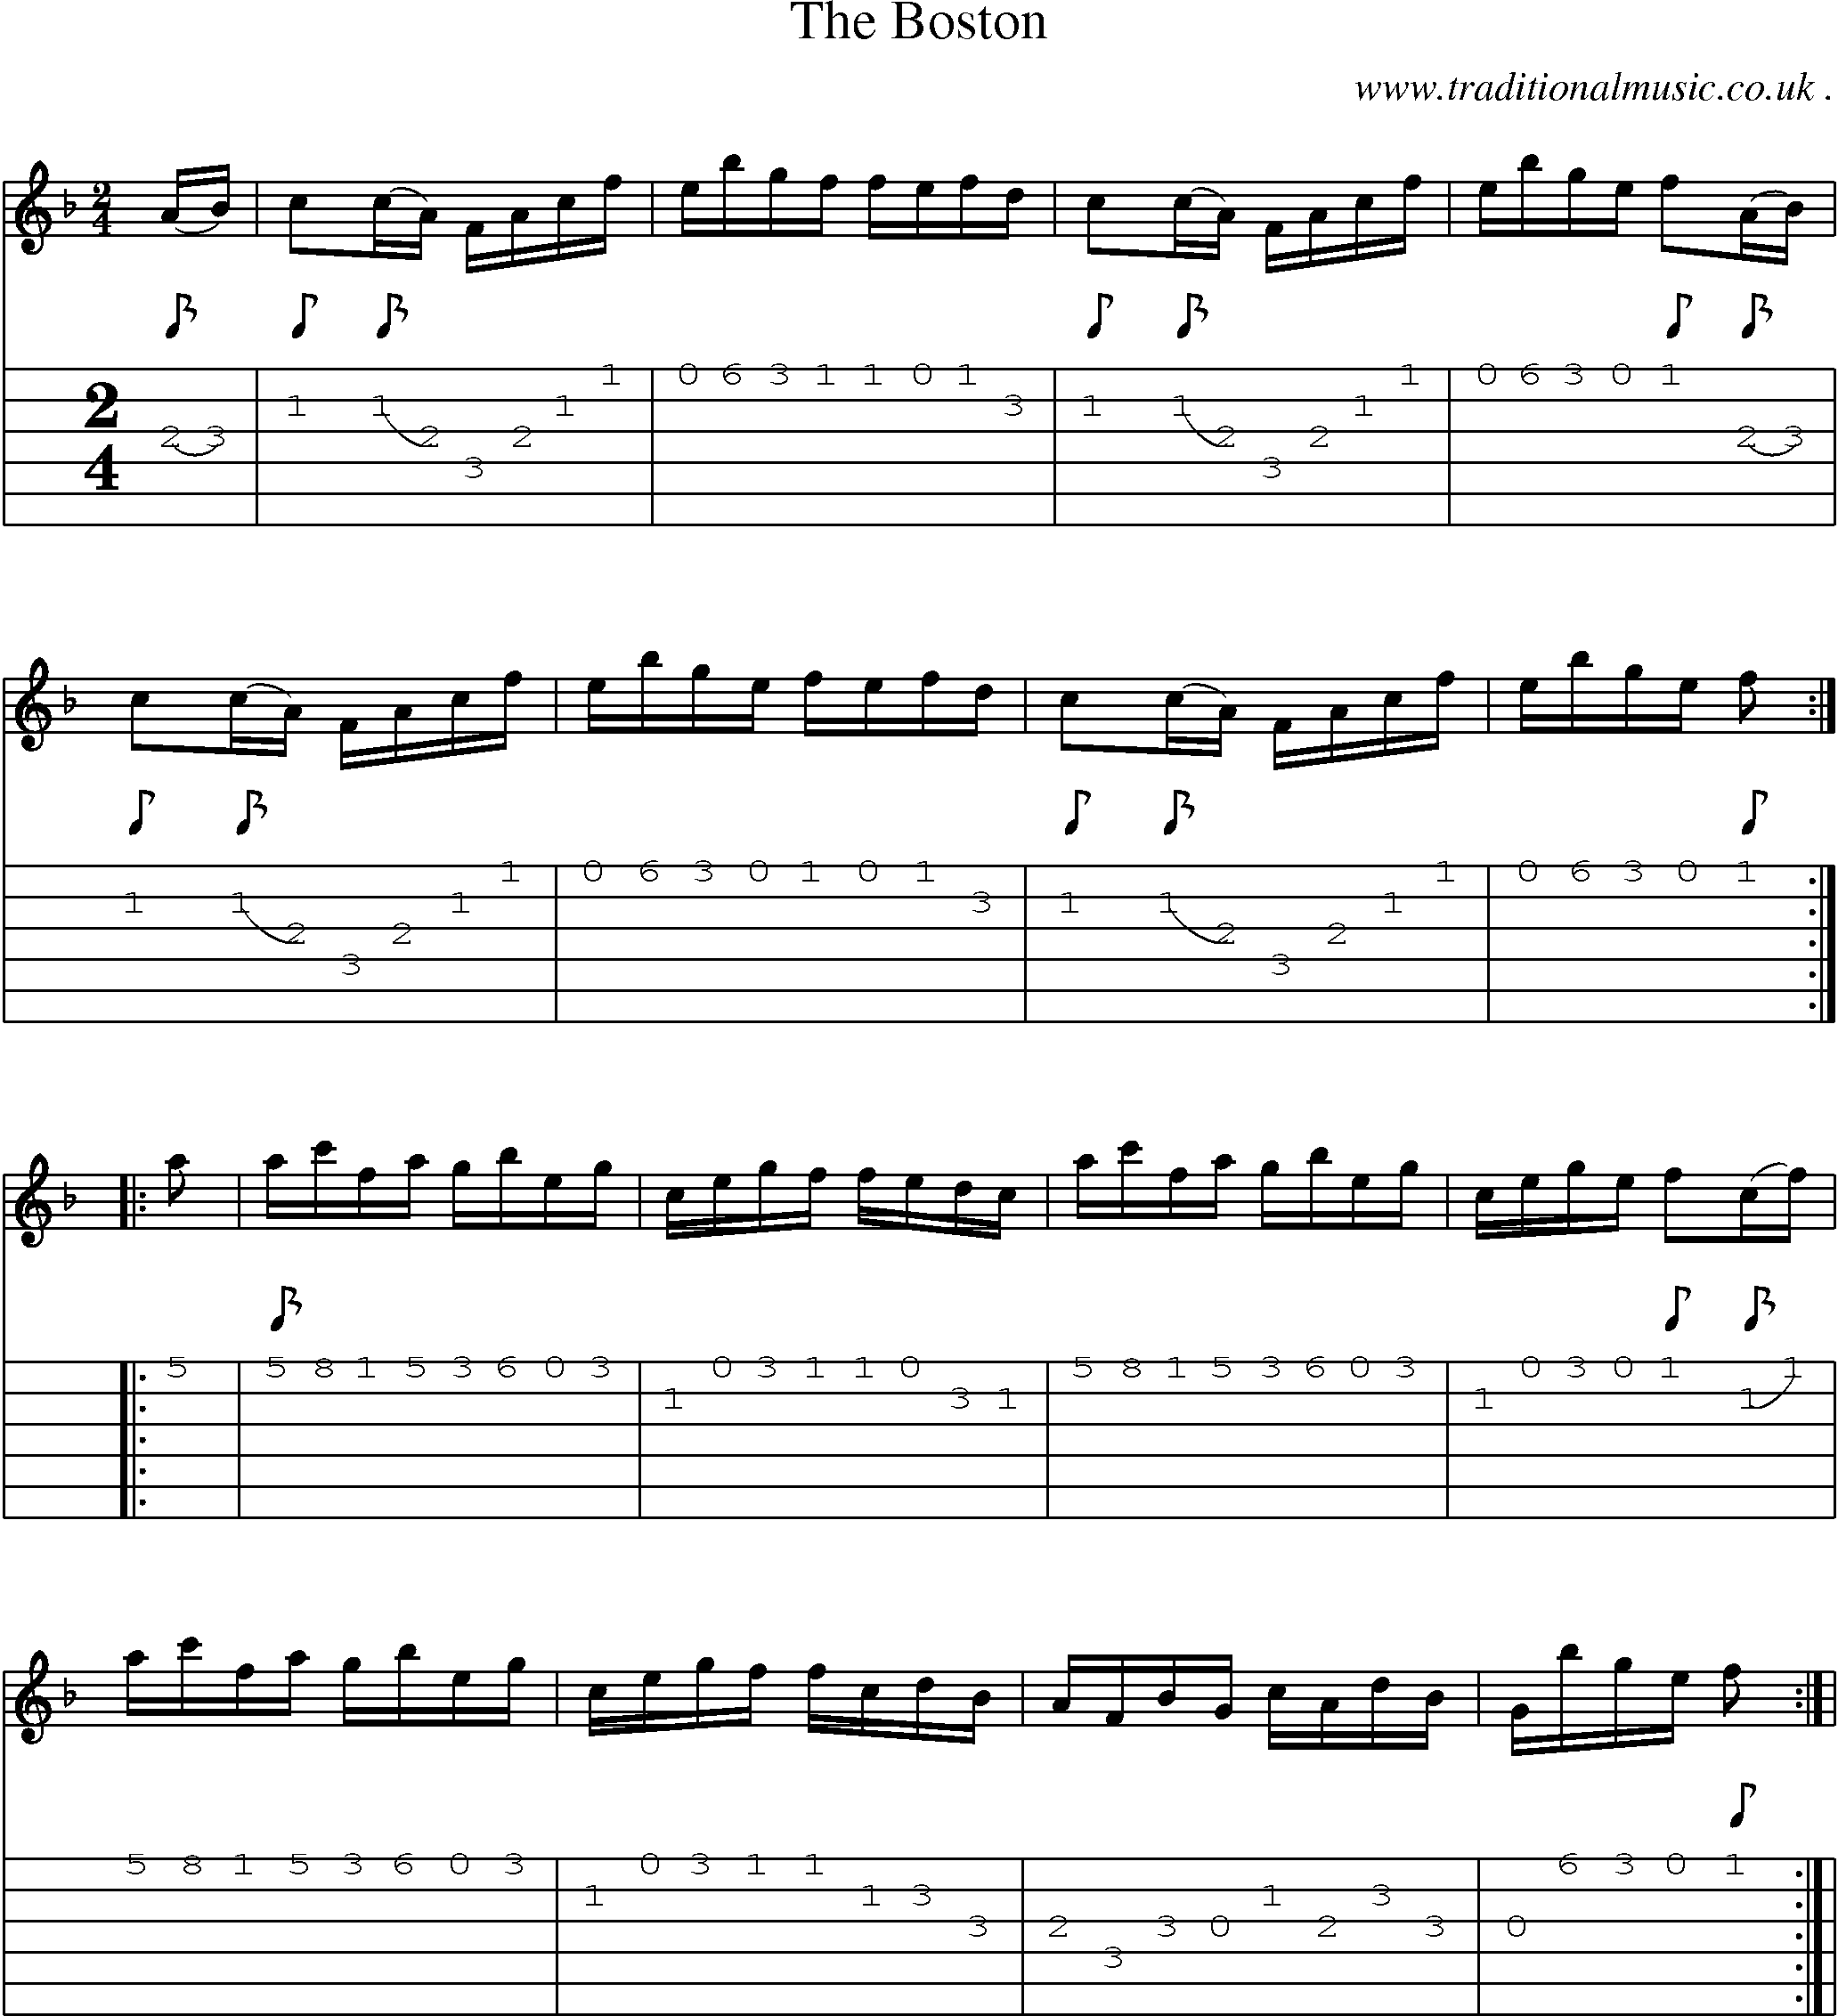 Sheet-Music and Guitar Tabs for The Boston